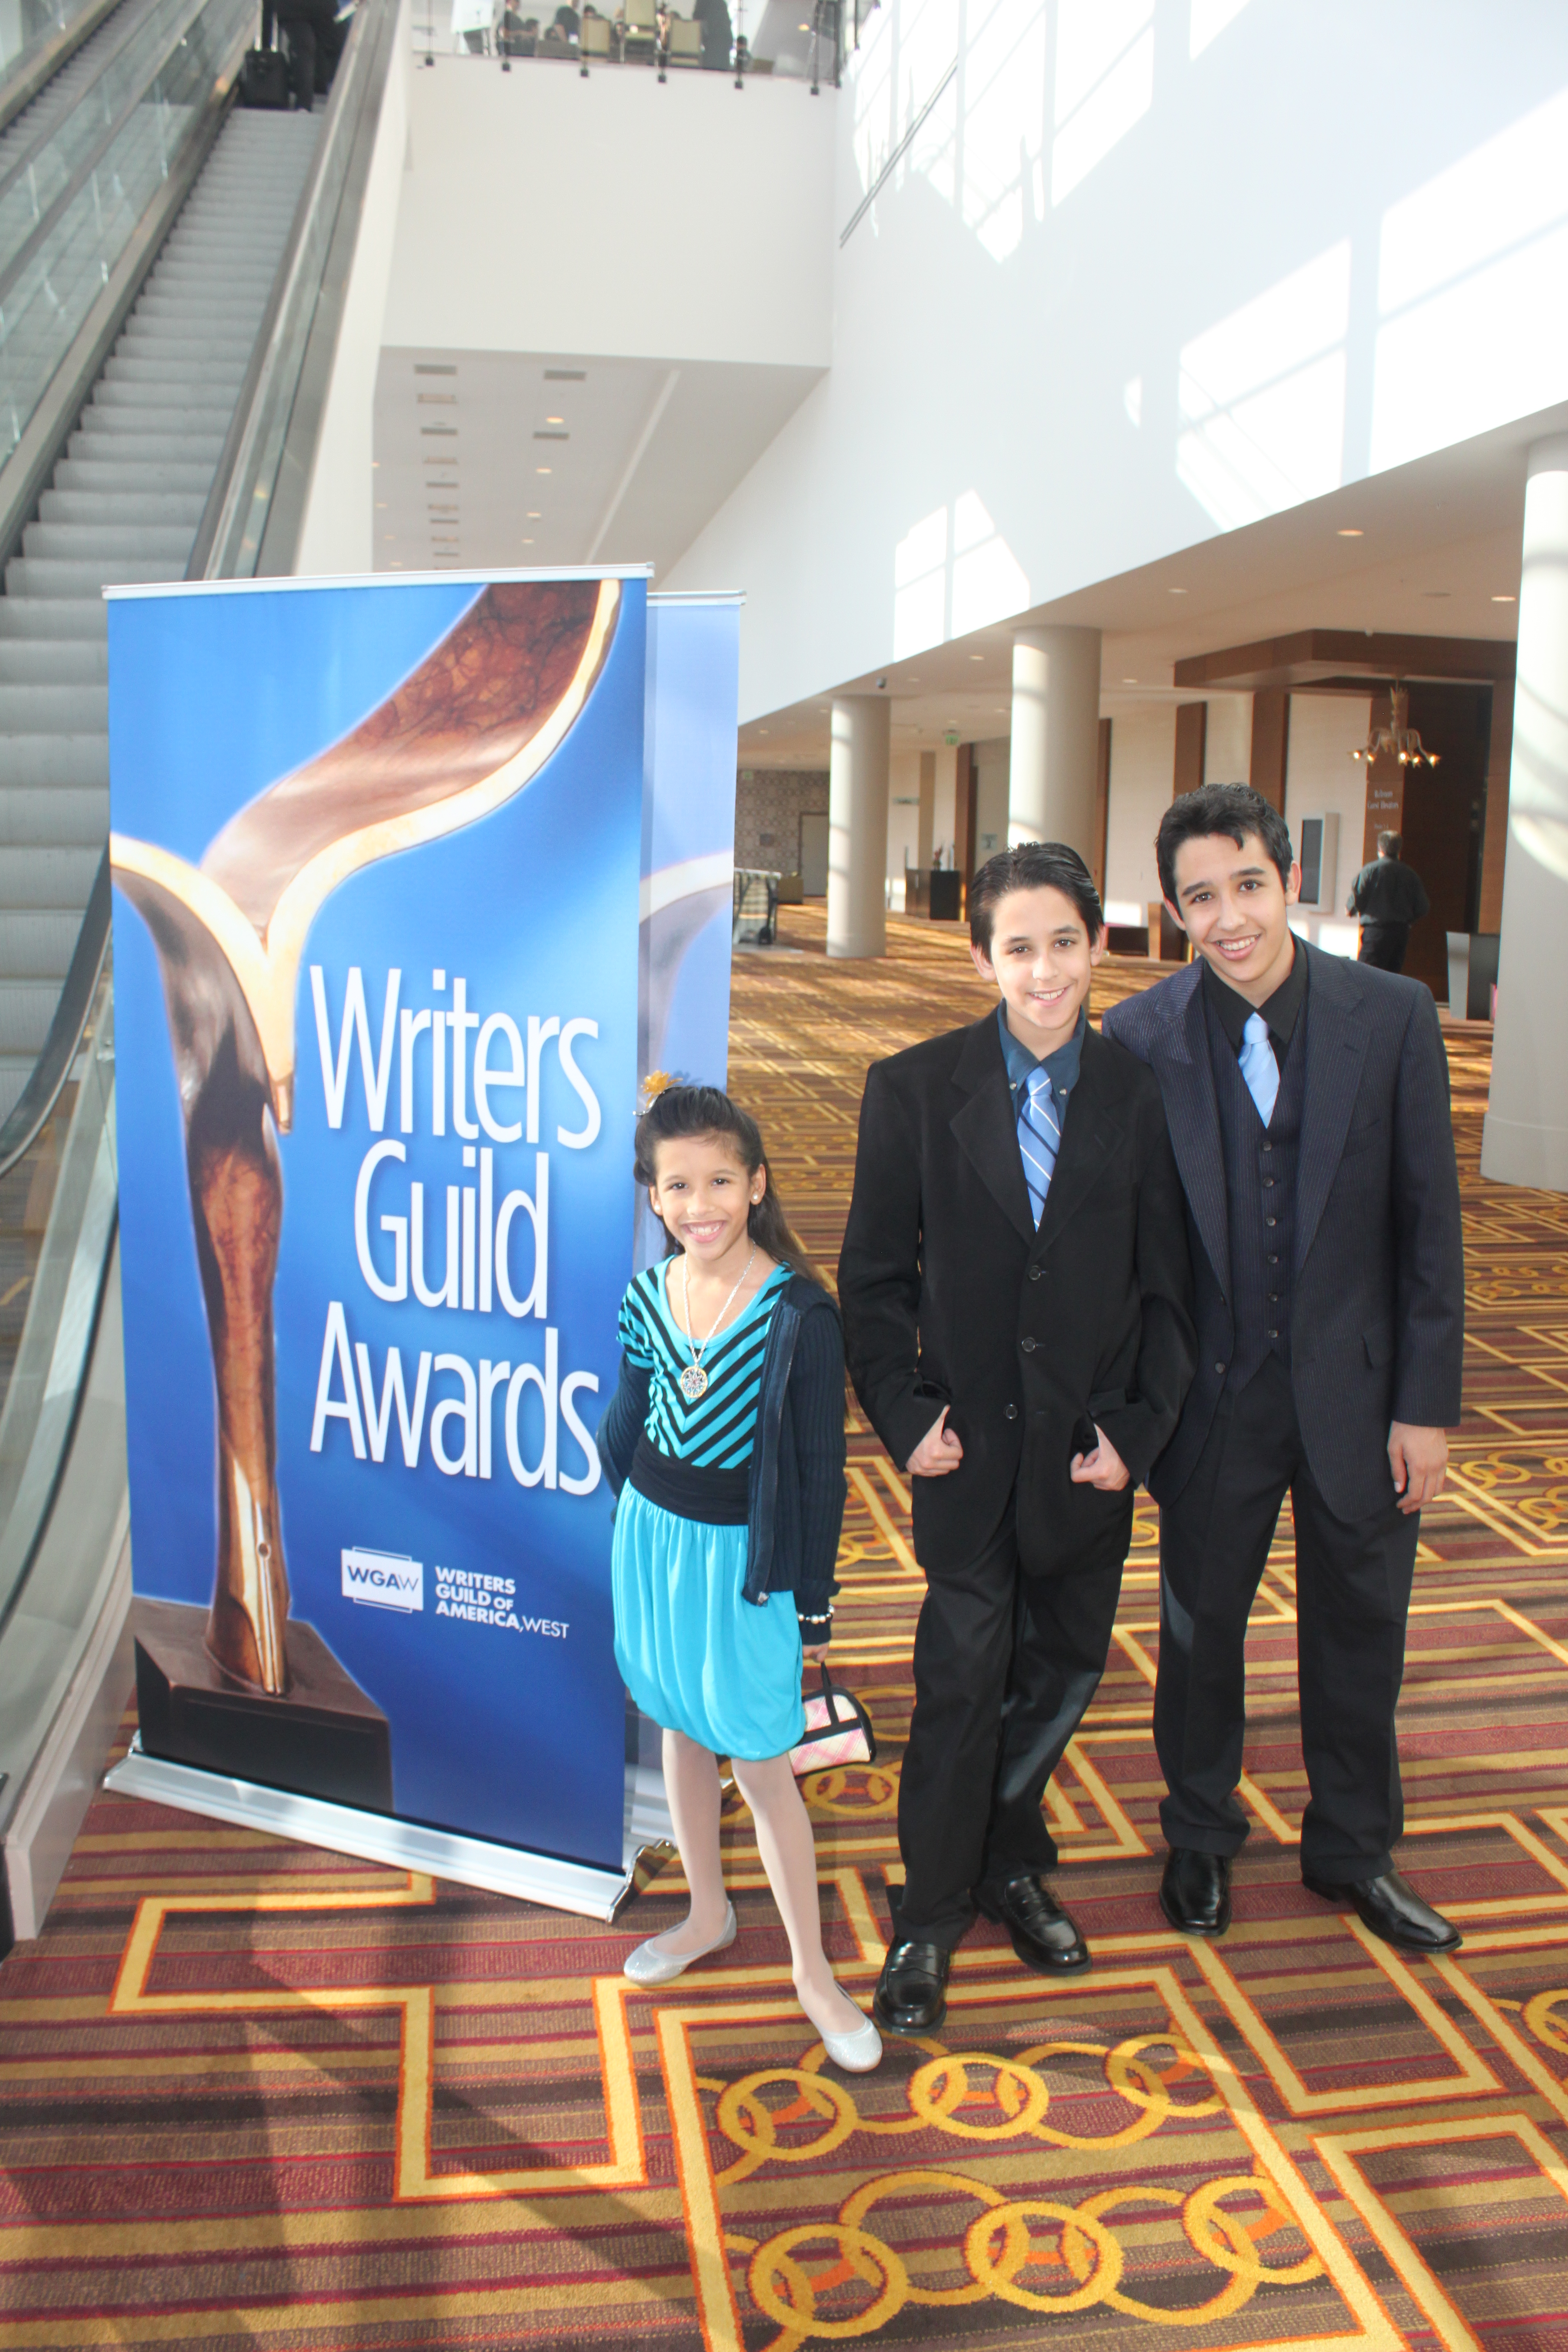 Arriving to The Writers Guild Awards with Nathaniel and Keira Pena